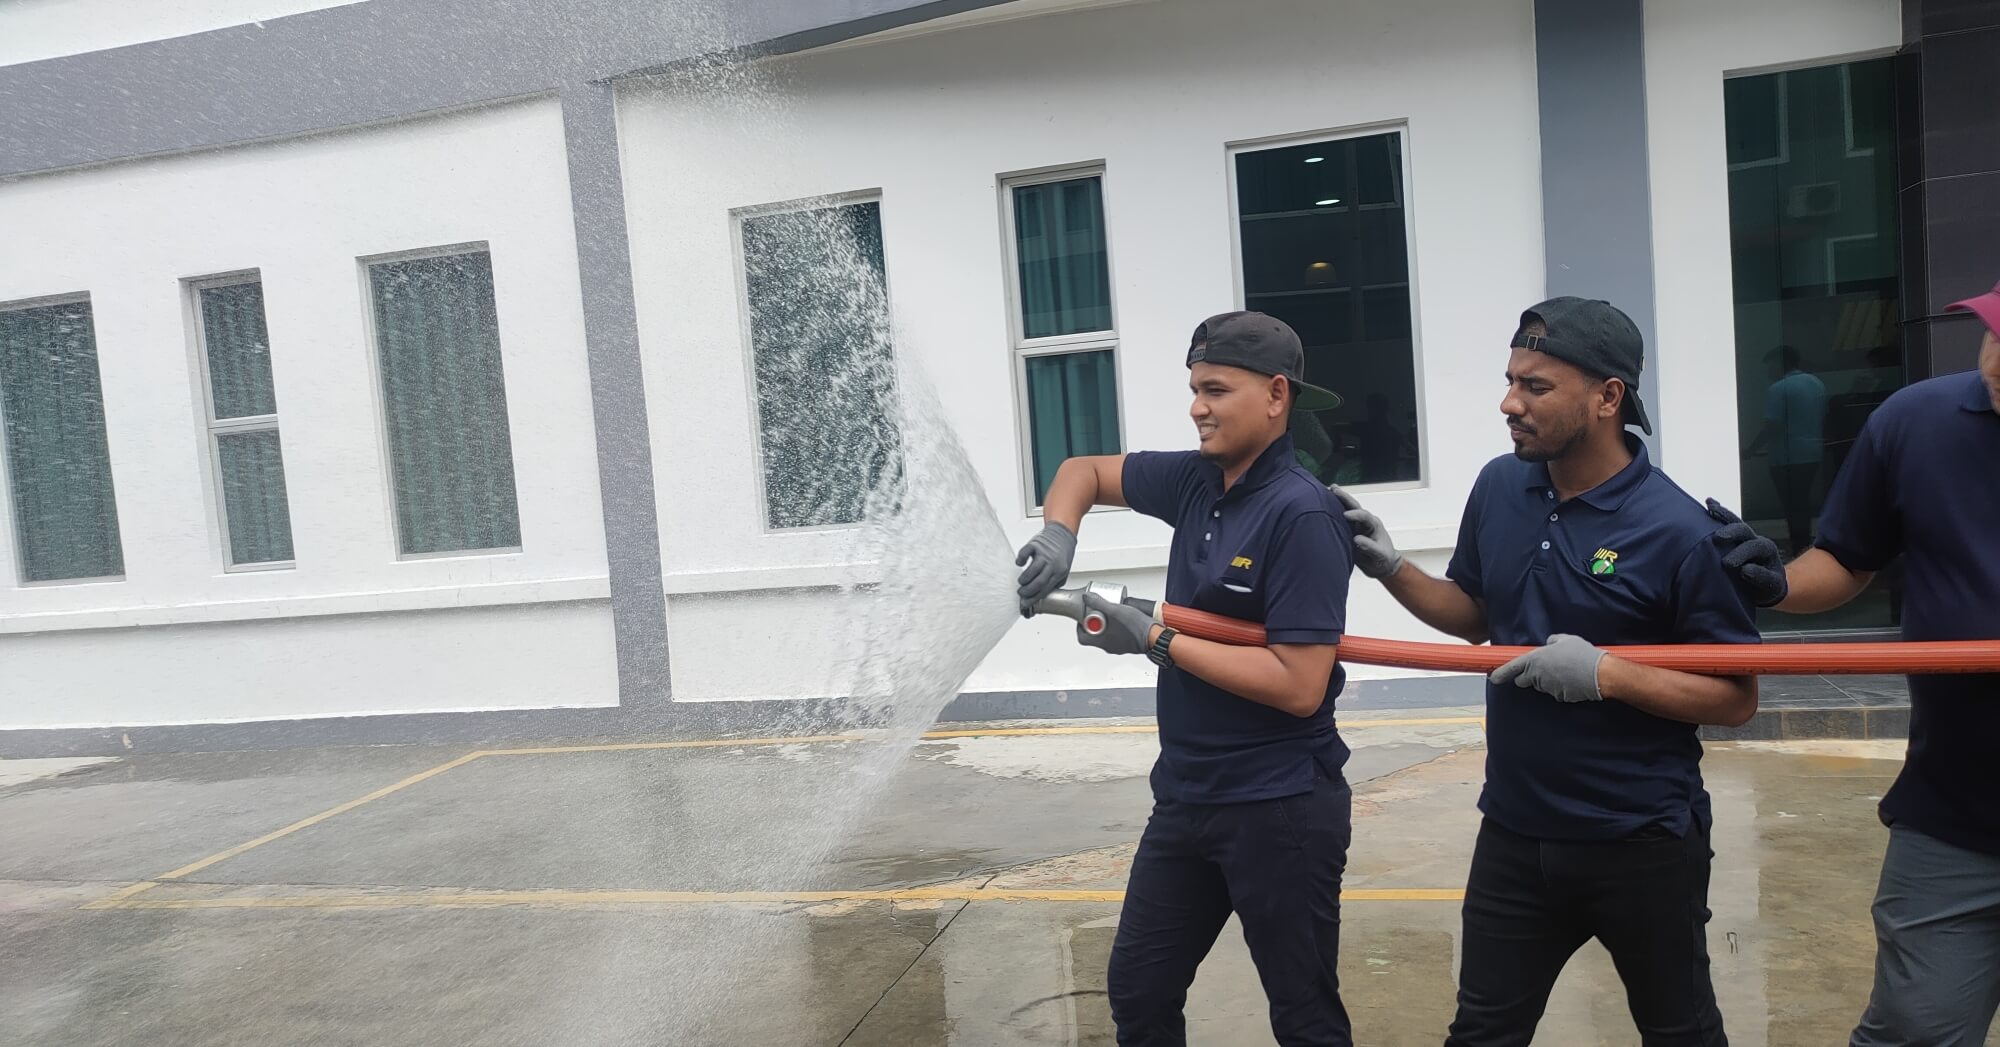 Basic Occupational Firefighting Training at ASEC